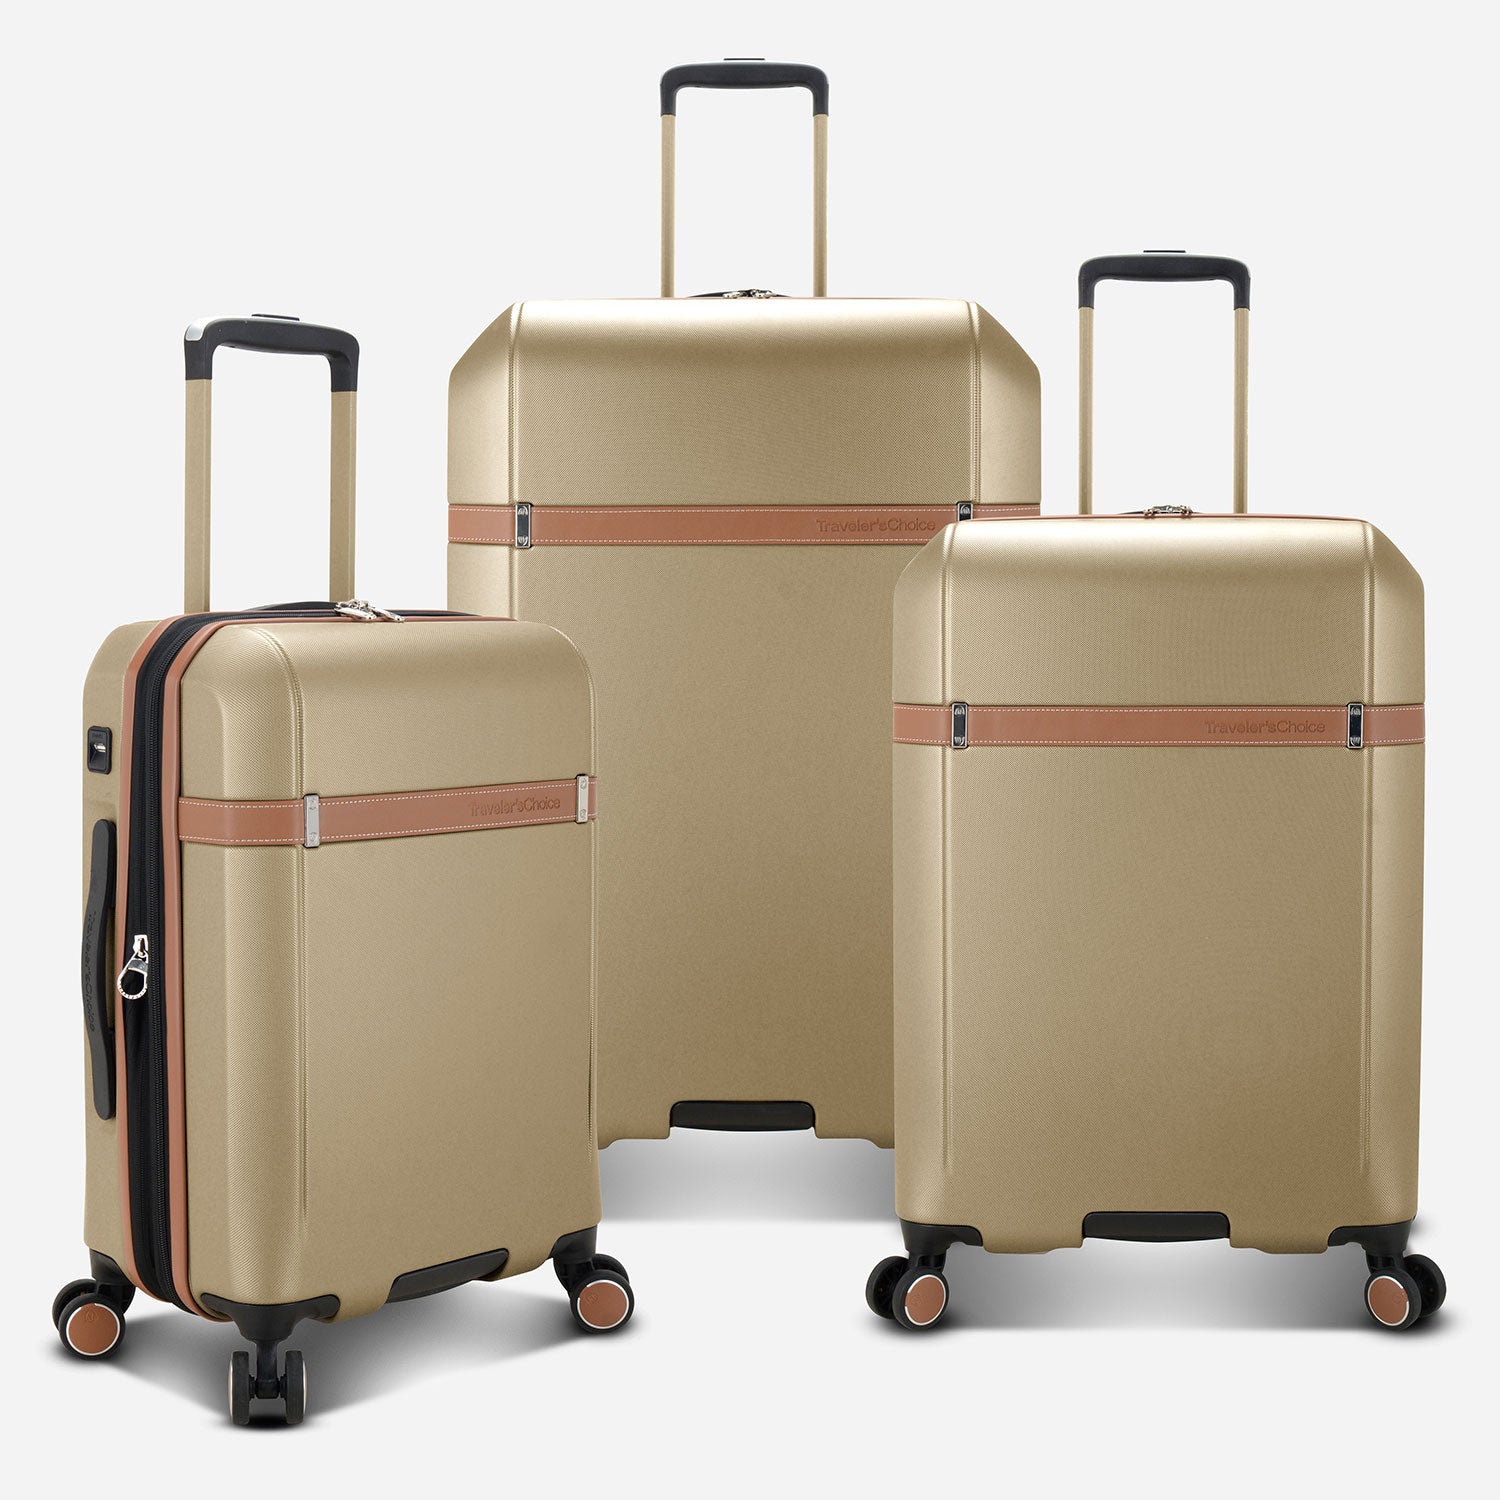 Candlewood 3 Piece Luggage Suitcase Set with 4 Spinner Wheels | Carry On with USB Port, Medium Checked, and Large Checked Suitcase